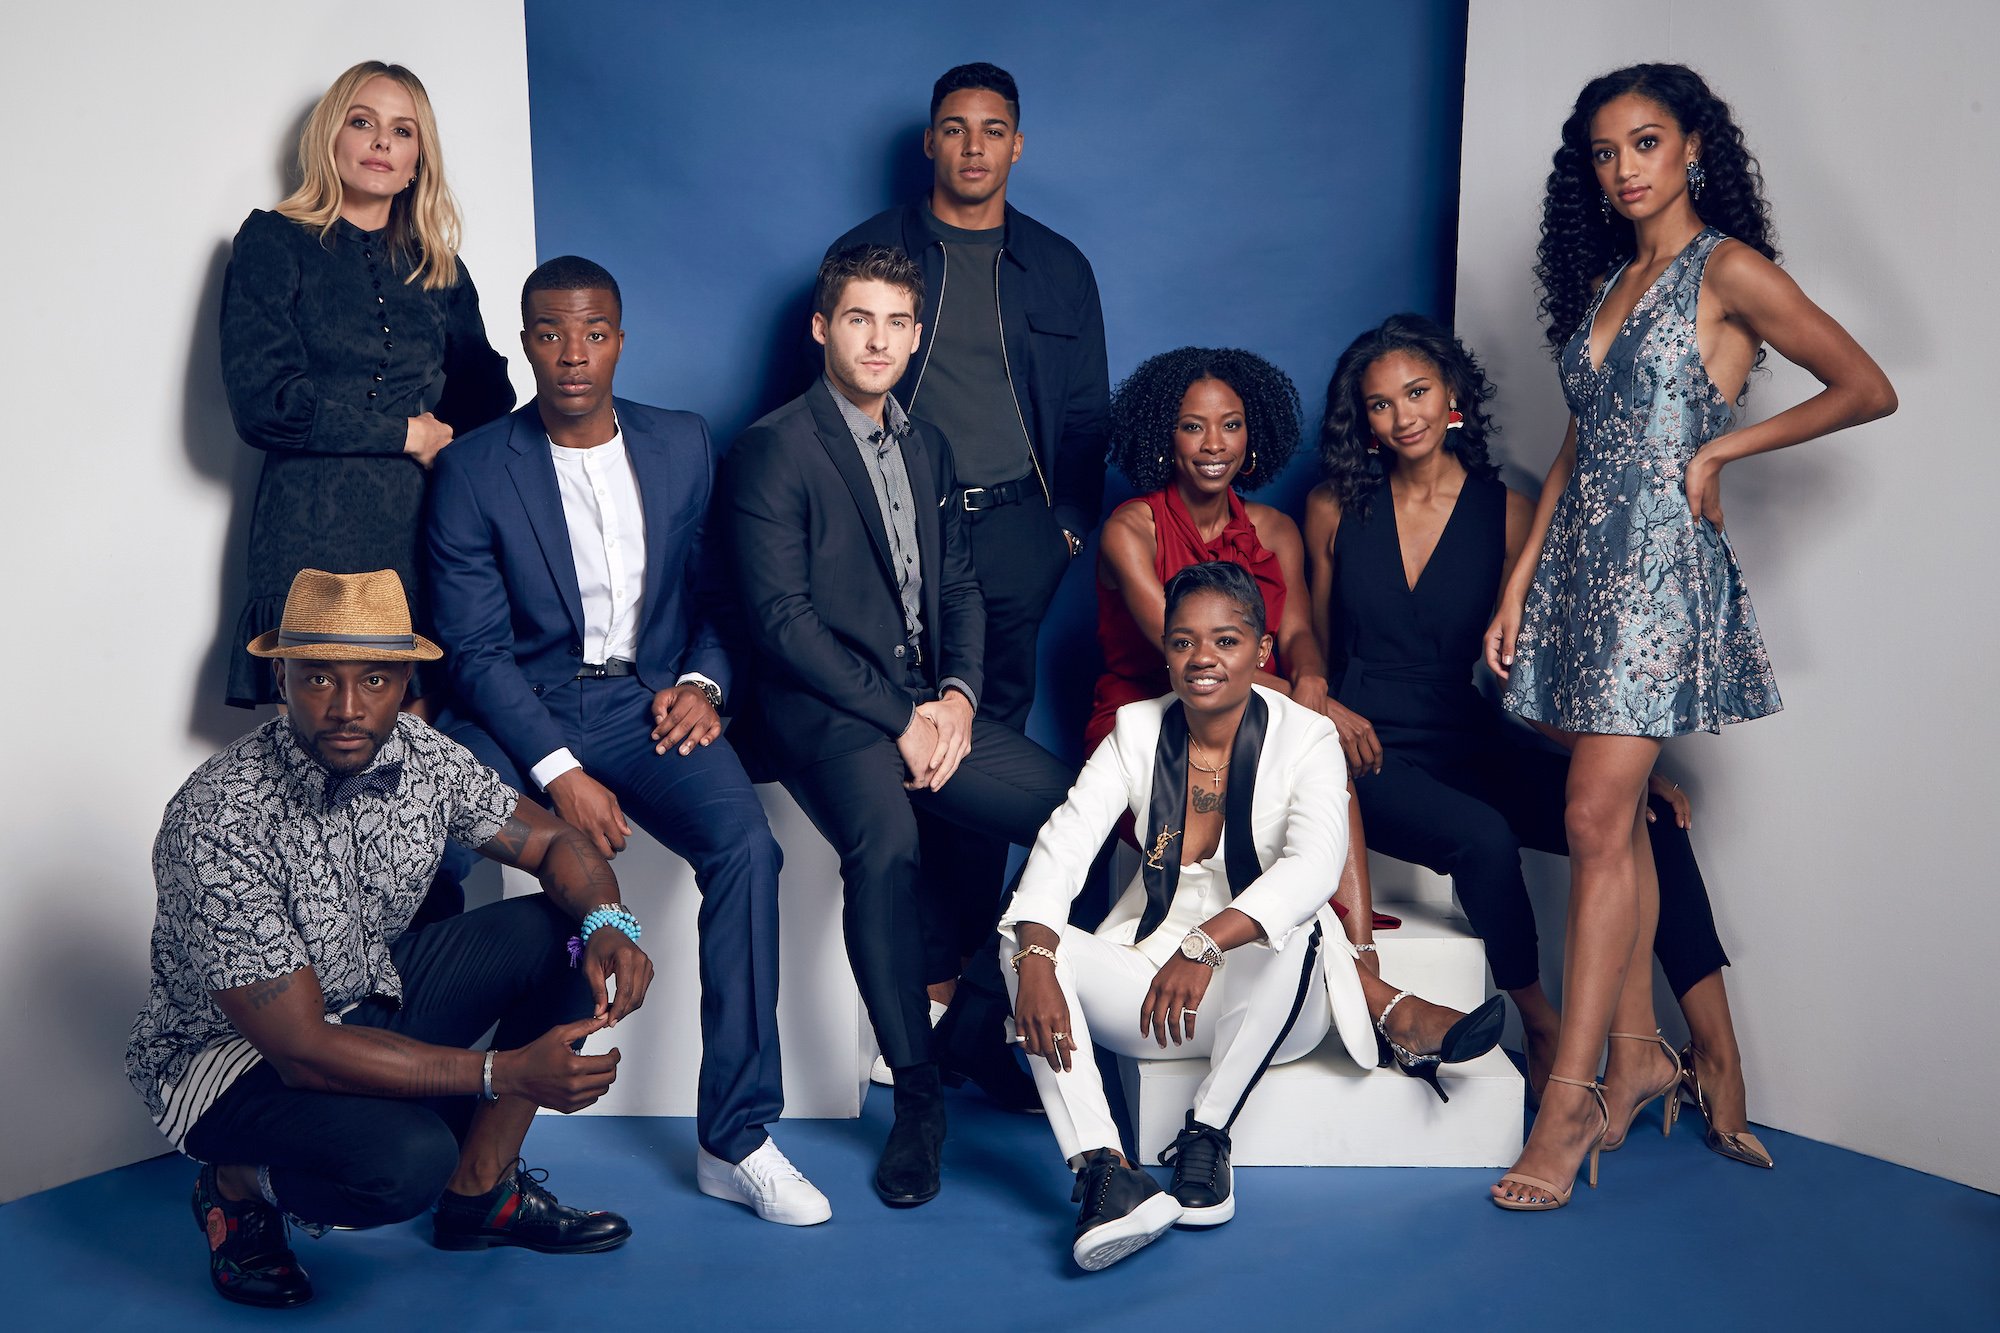 The 'All American' cast posing for a portrait at the 2018 Summer TCA.